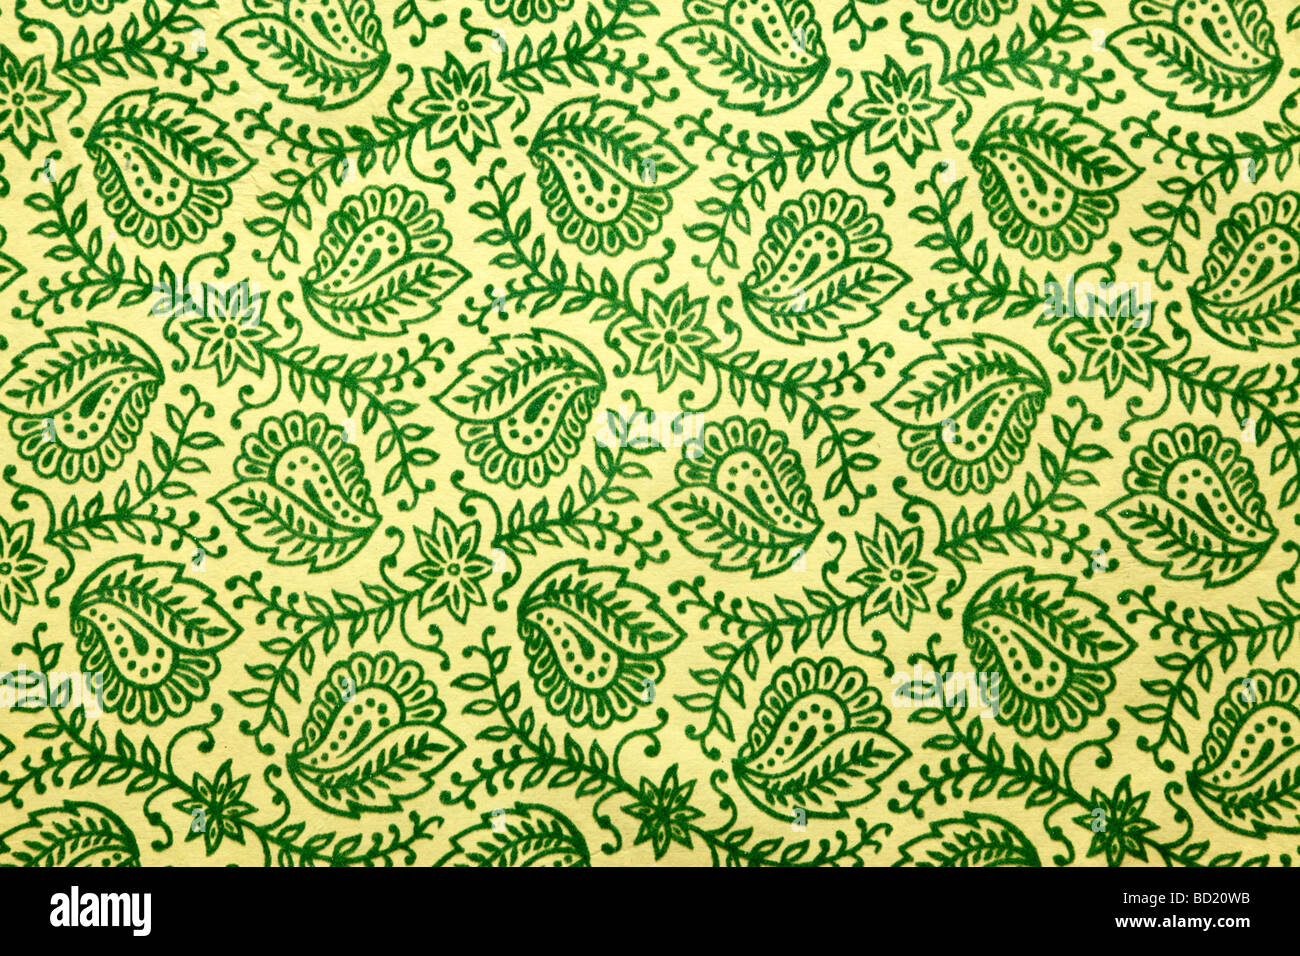 detail of green paisley pattern Stock Photo